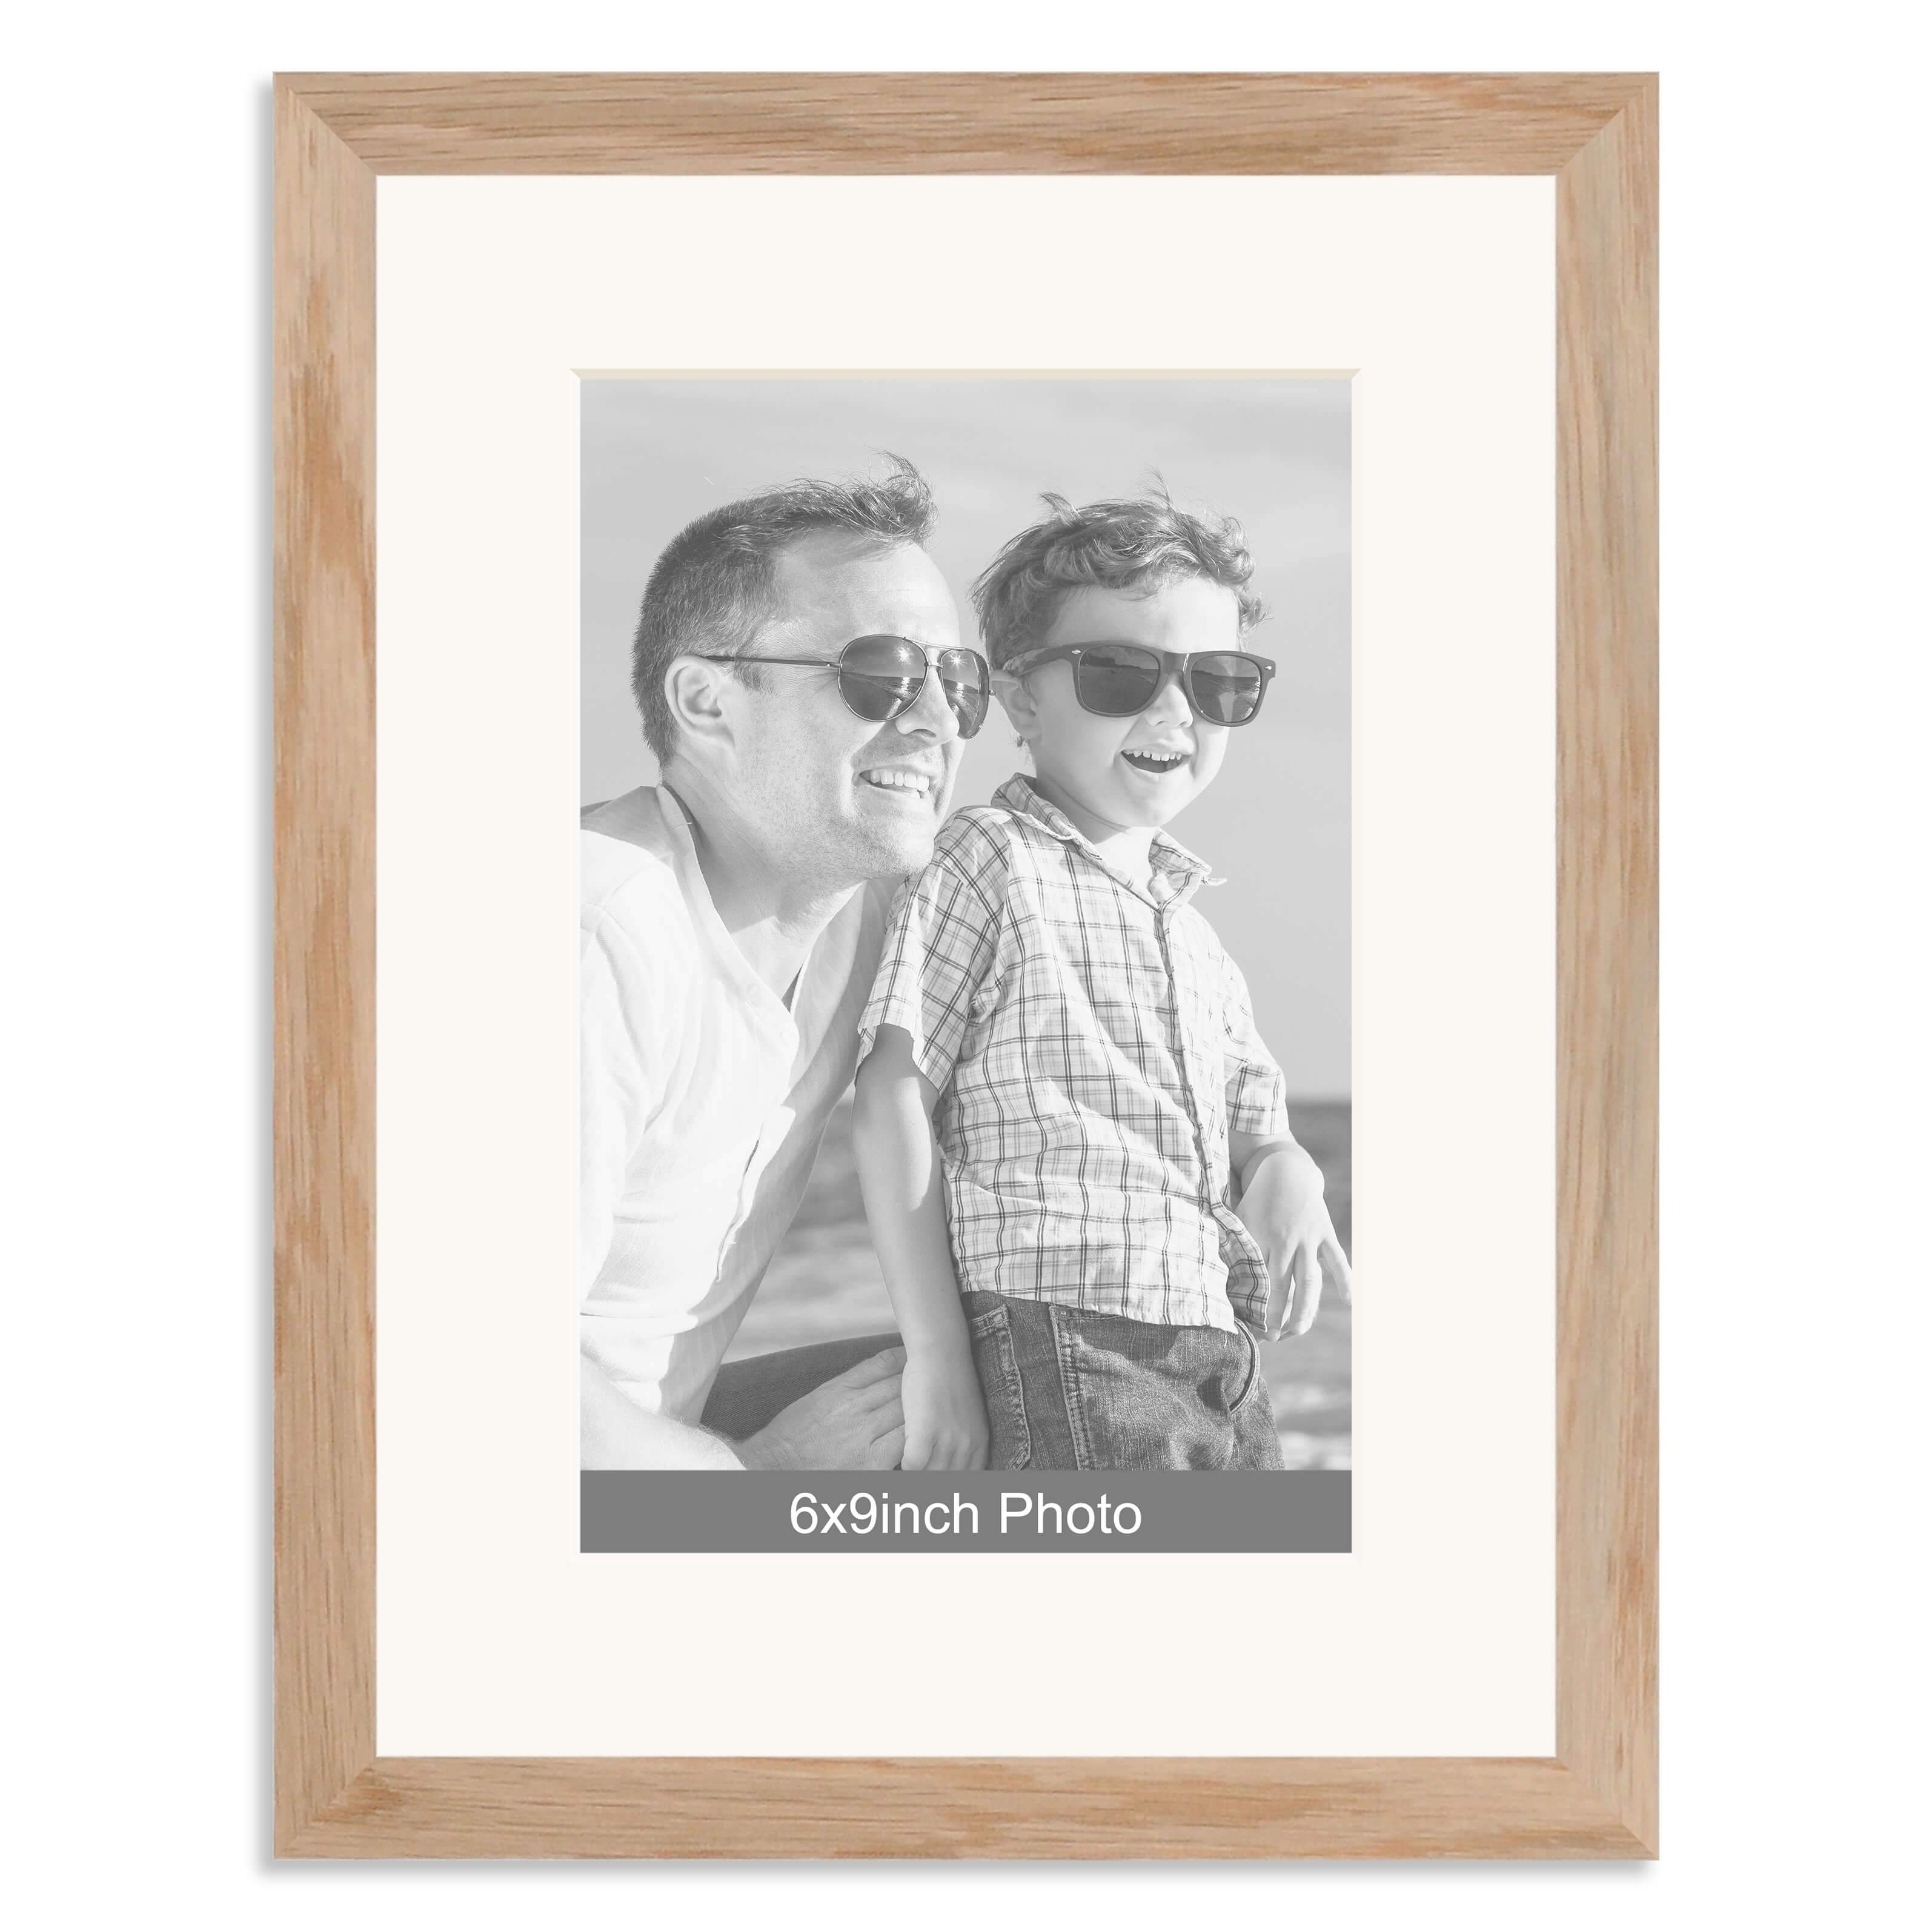 Solid Oak Photo Frame with mount for a 9×6/6x9in Photo – Photo uploaded below